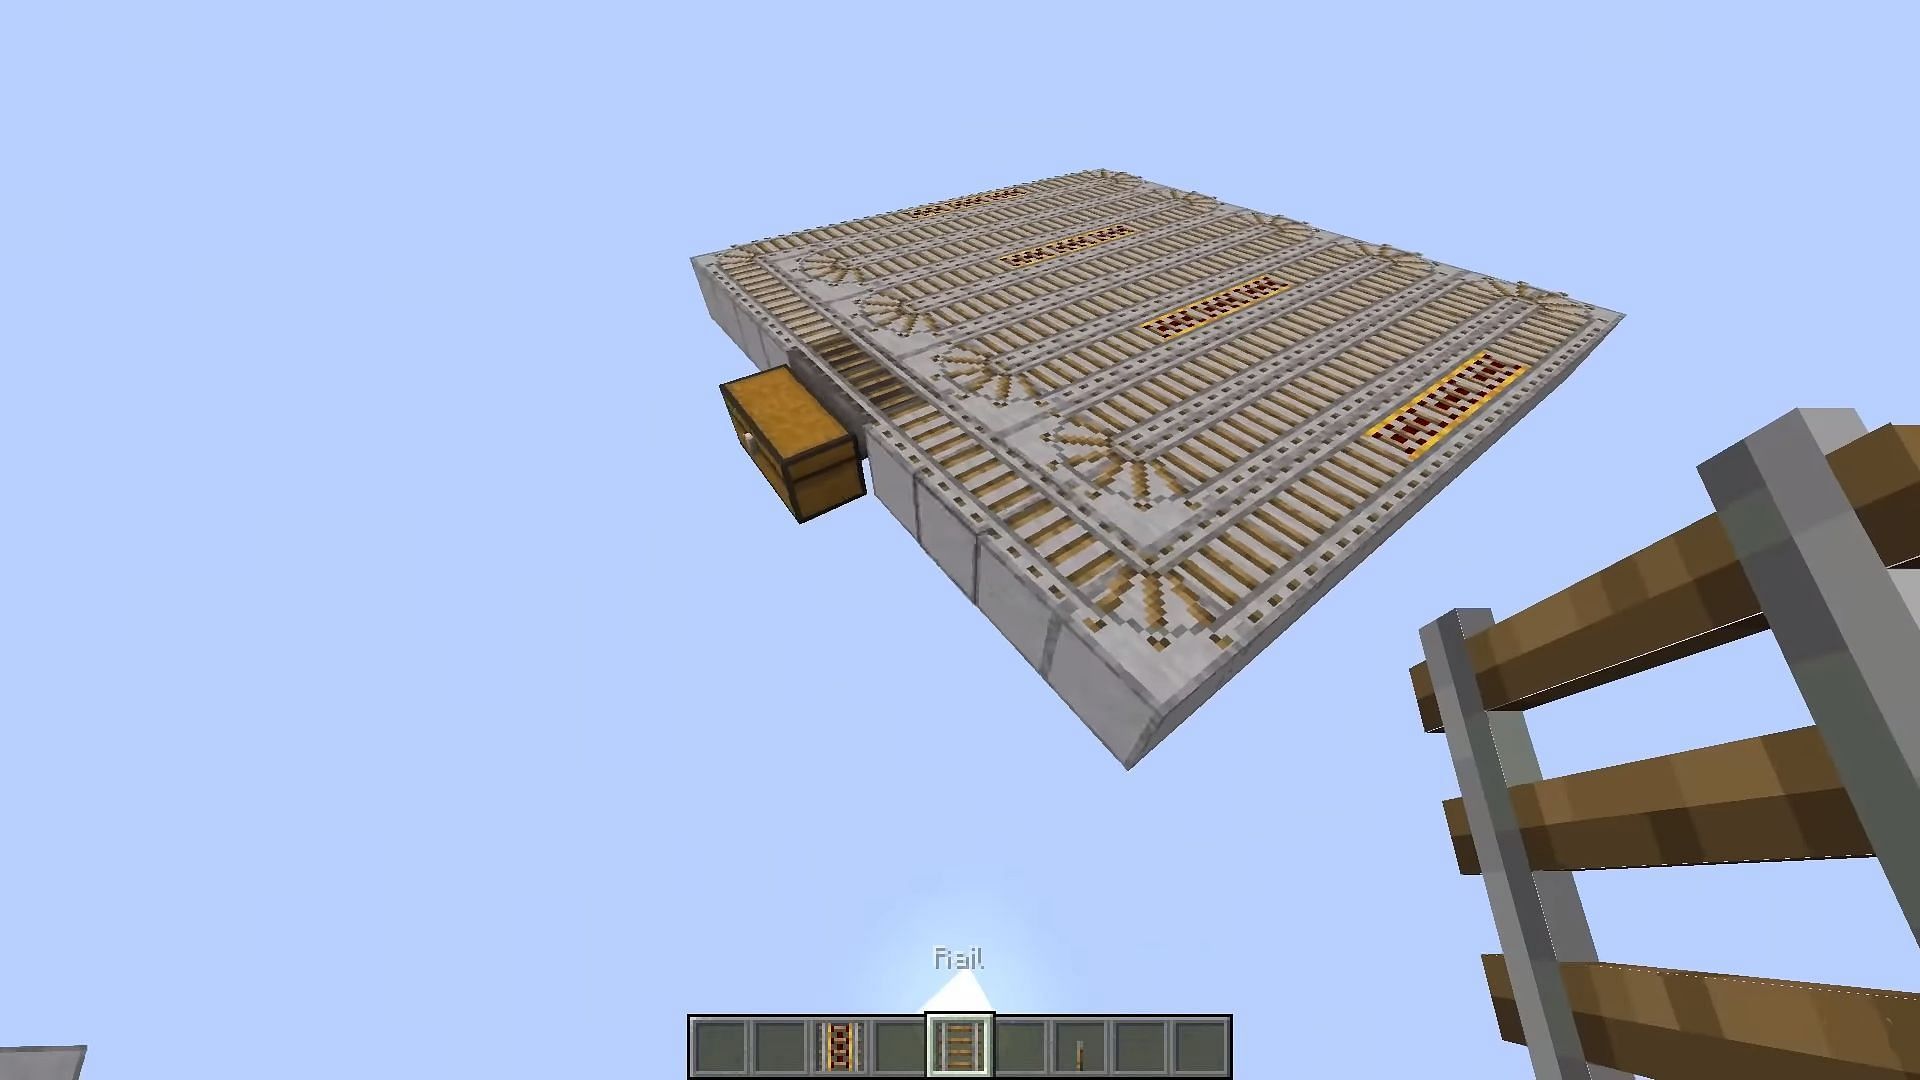 Sniffer farm collection zone with two hoppers, chests, and rails on which minecart with hoppers travel in Minecraft (Image via YouTube/wattles)